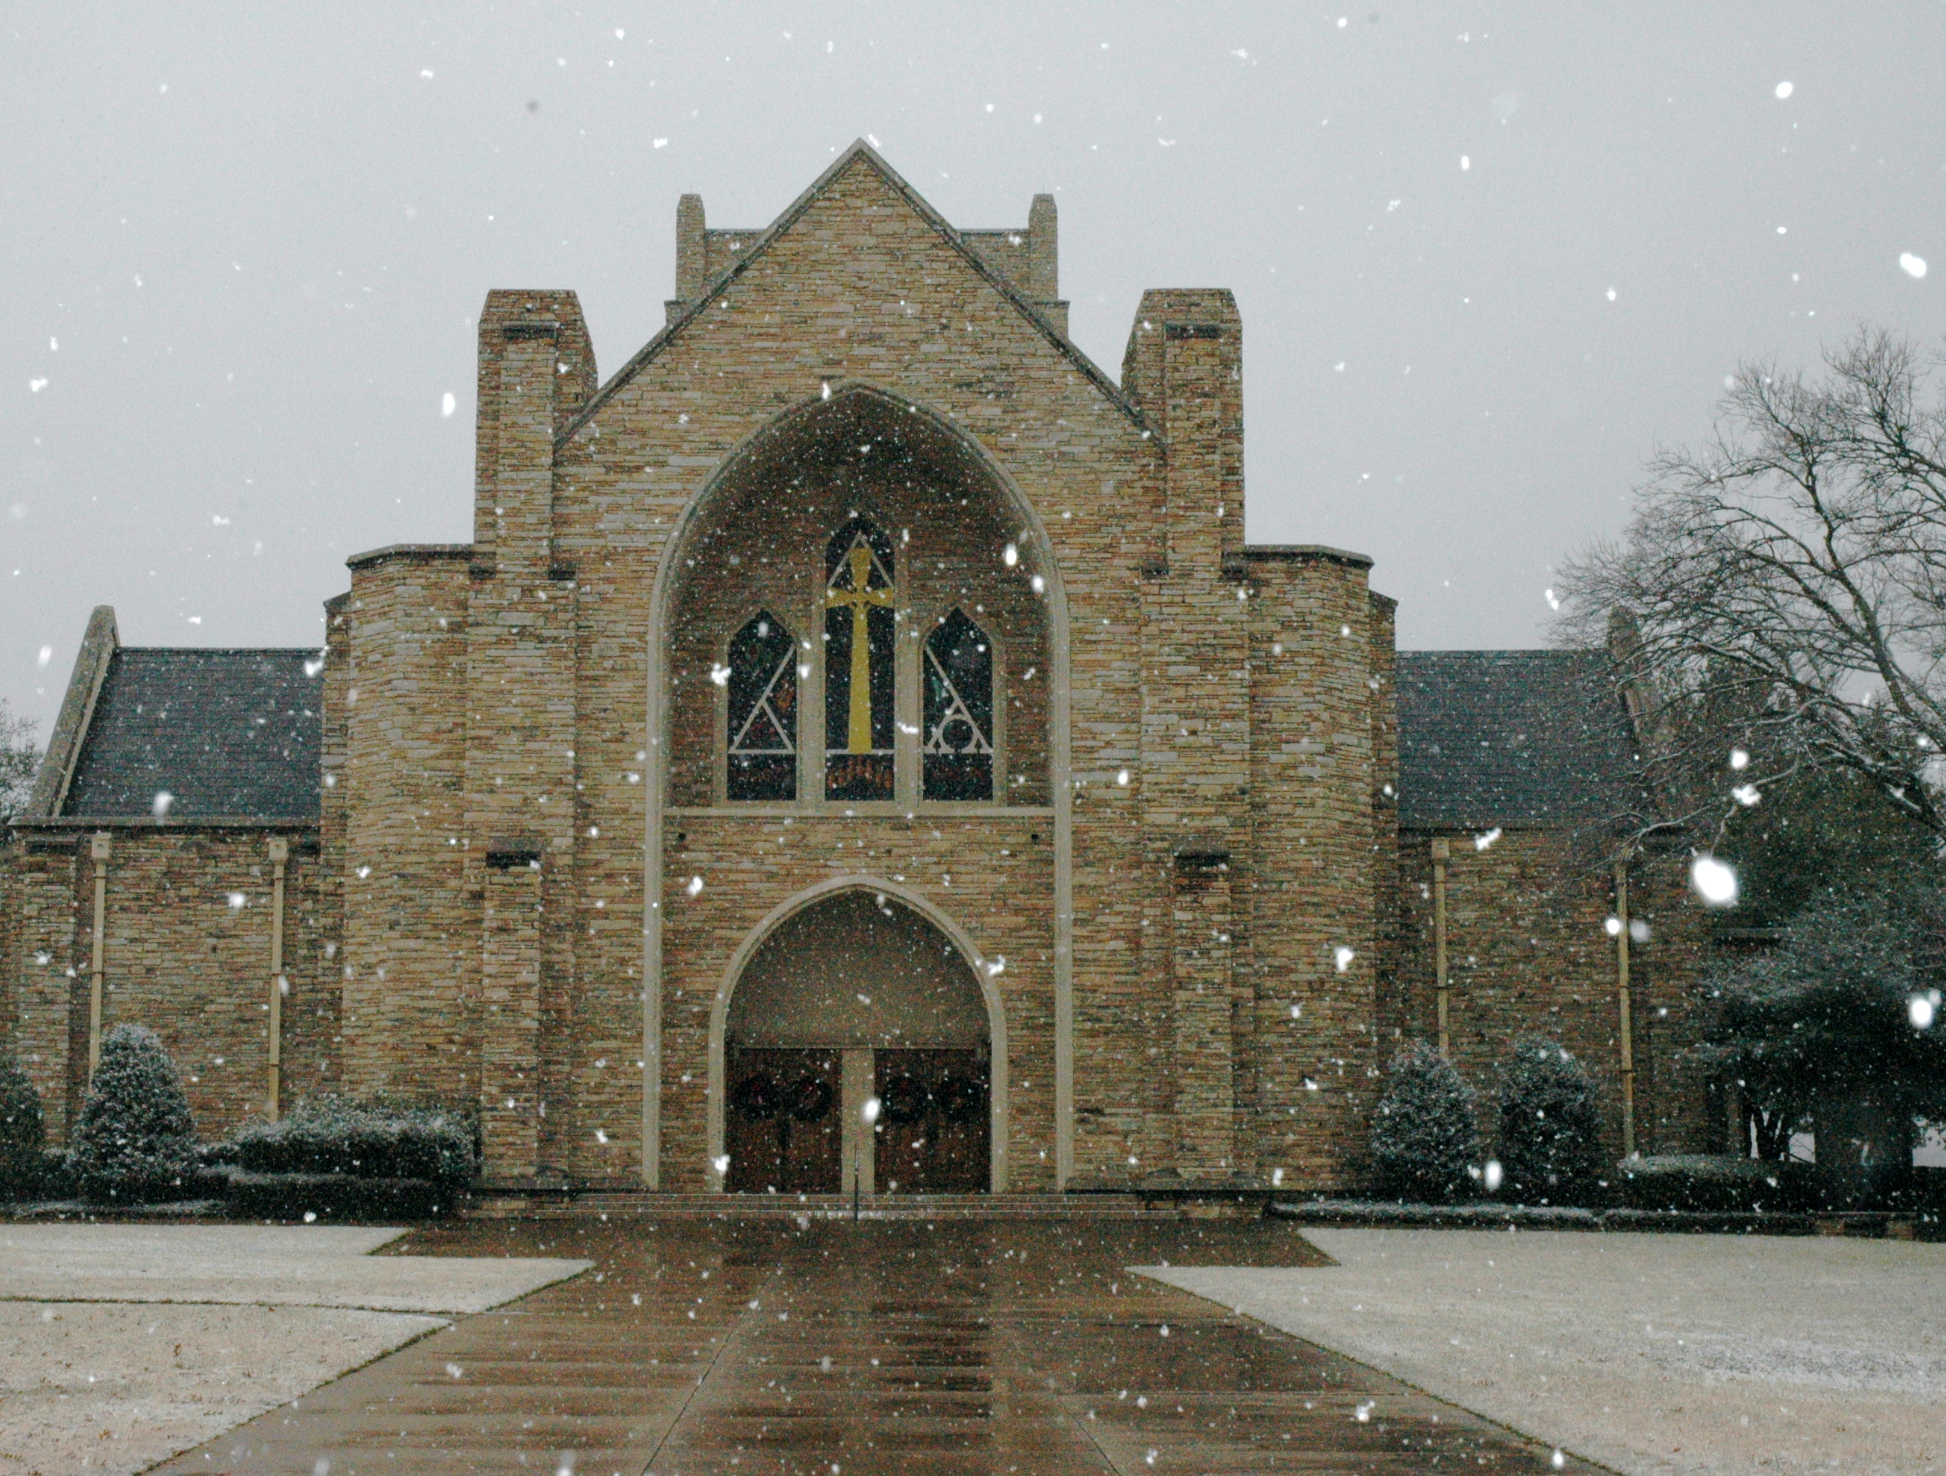 St. Stephen in the snow!